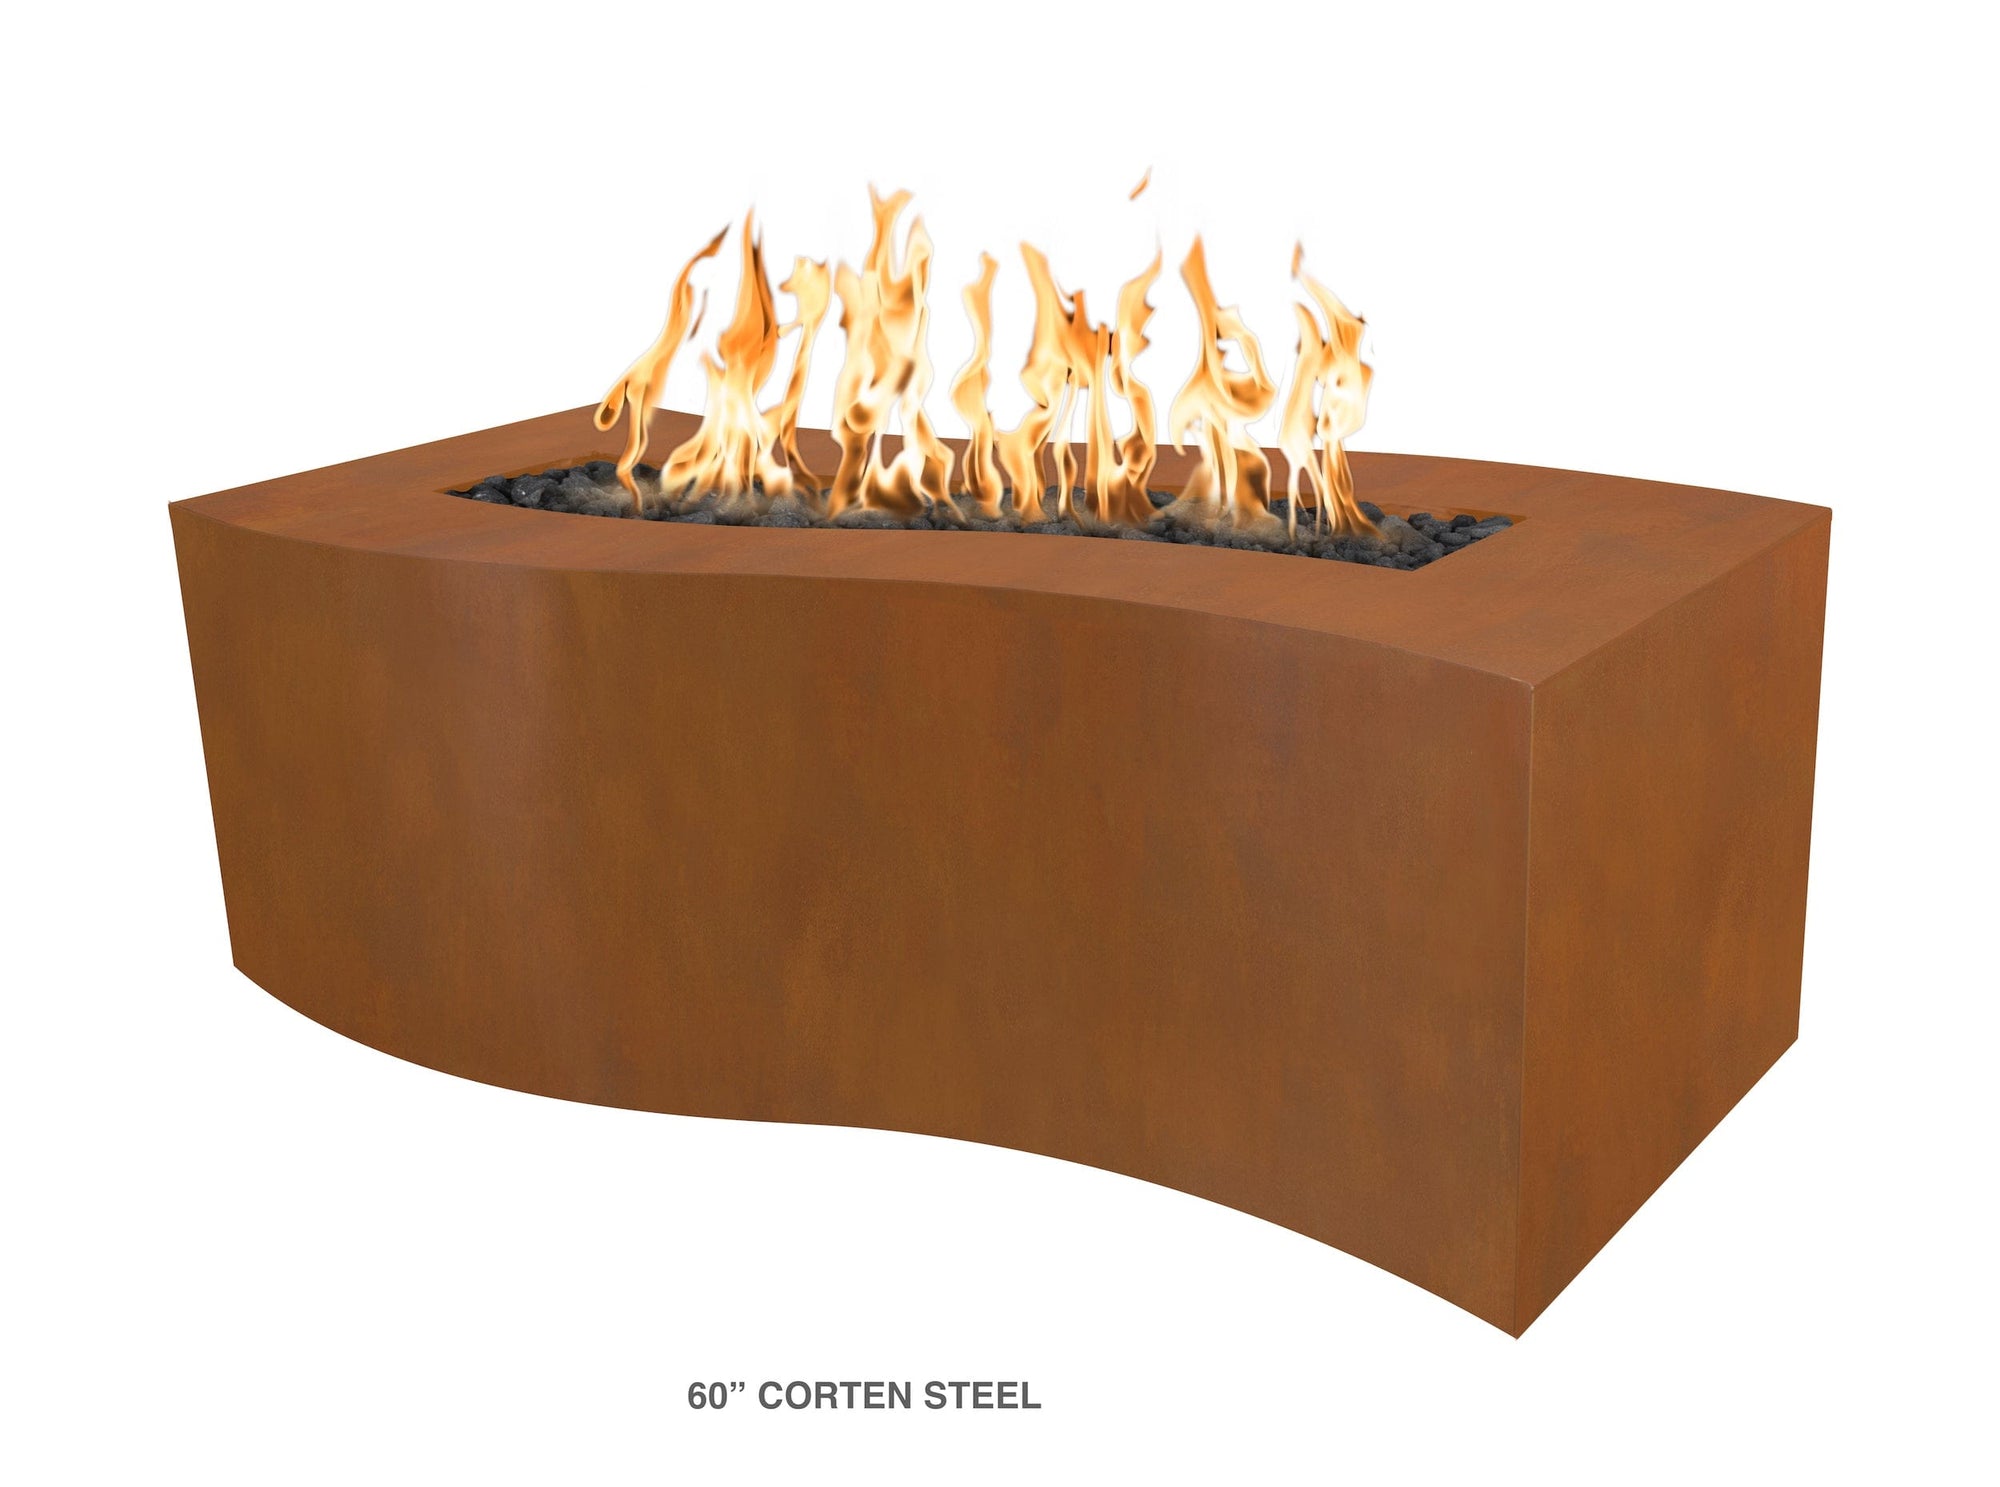 The Outdoor Plus Fire Features The Outdoor Plus 60" Rectangular Billow Fire Pit - Copper or Steel / OPT-BLWCPR60, OPT-BLWCS60, OPT-BLWSS60